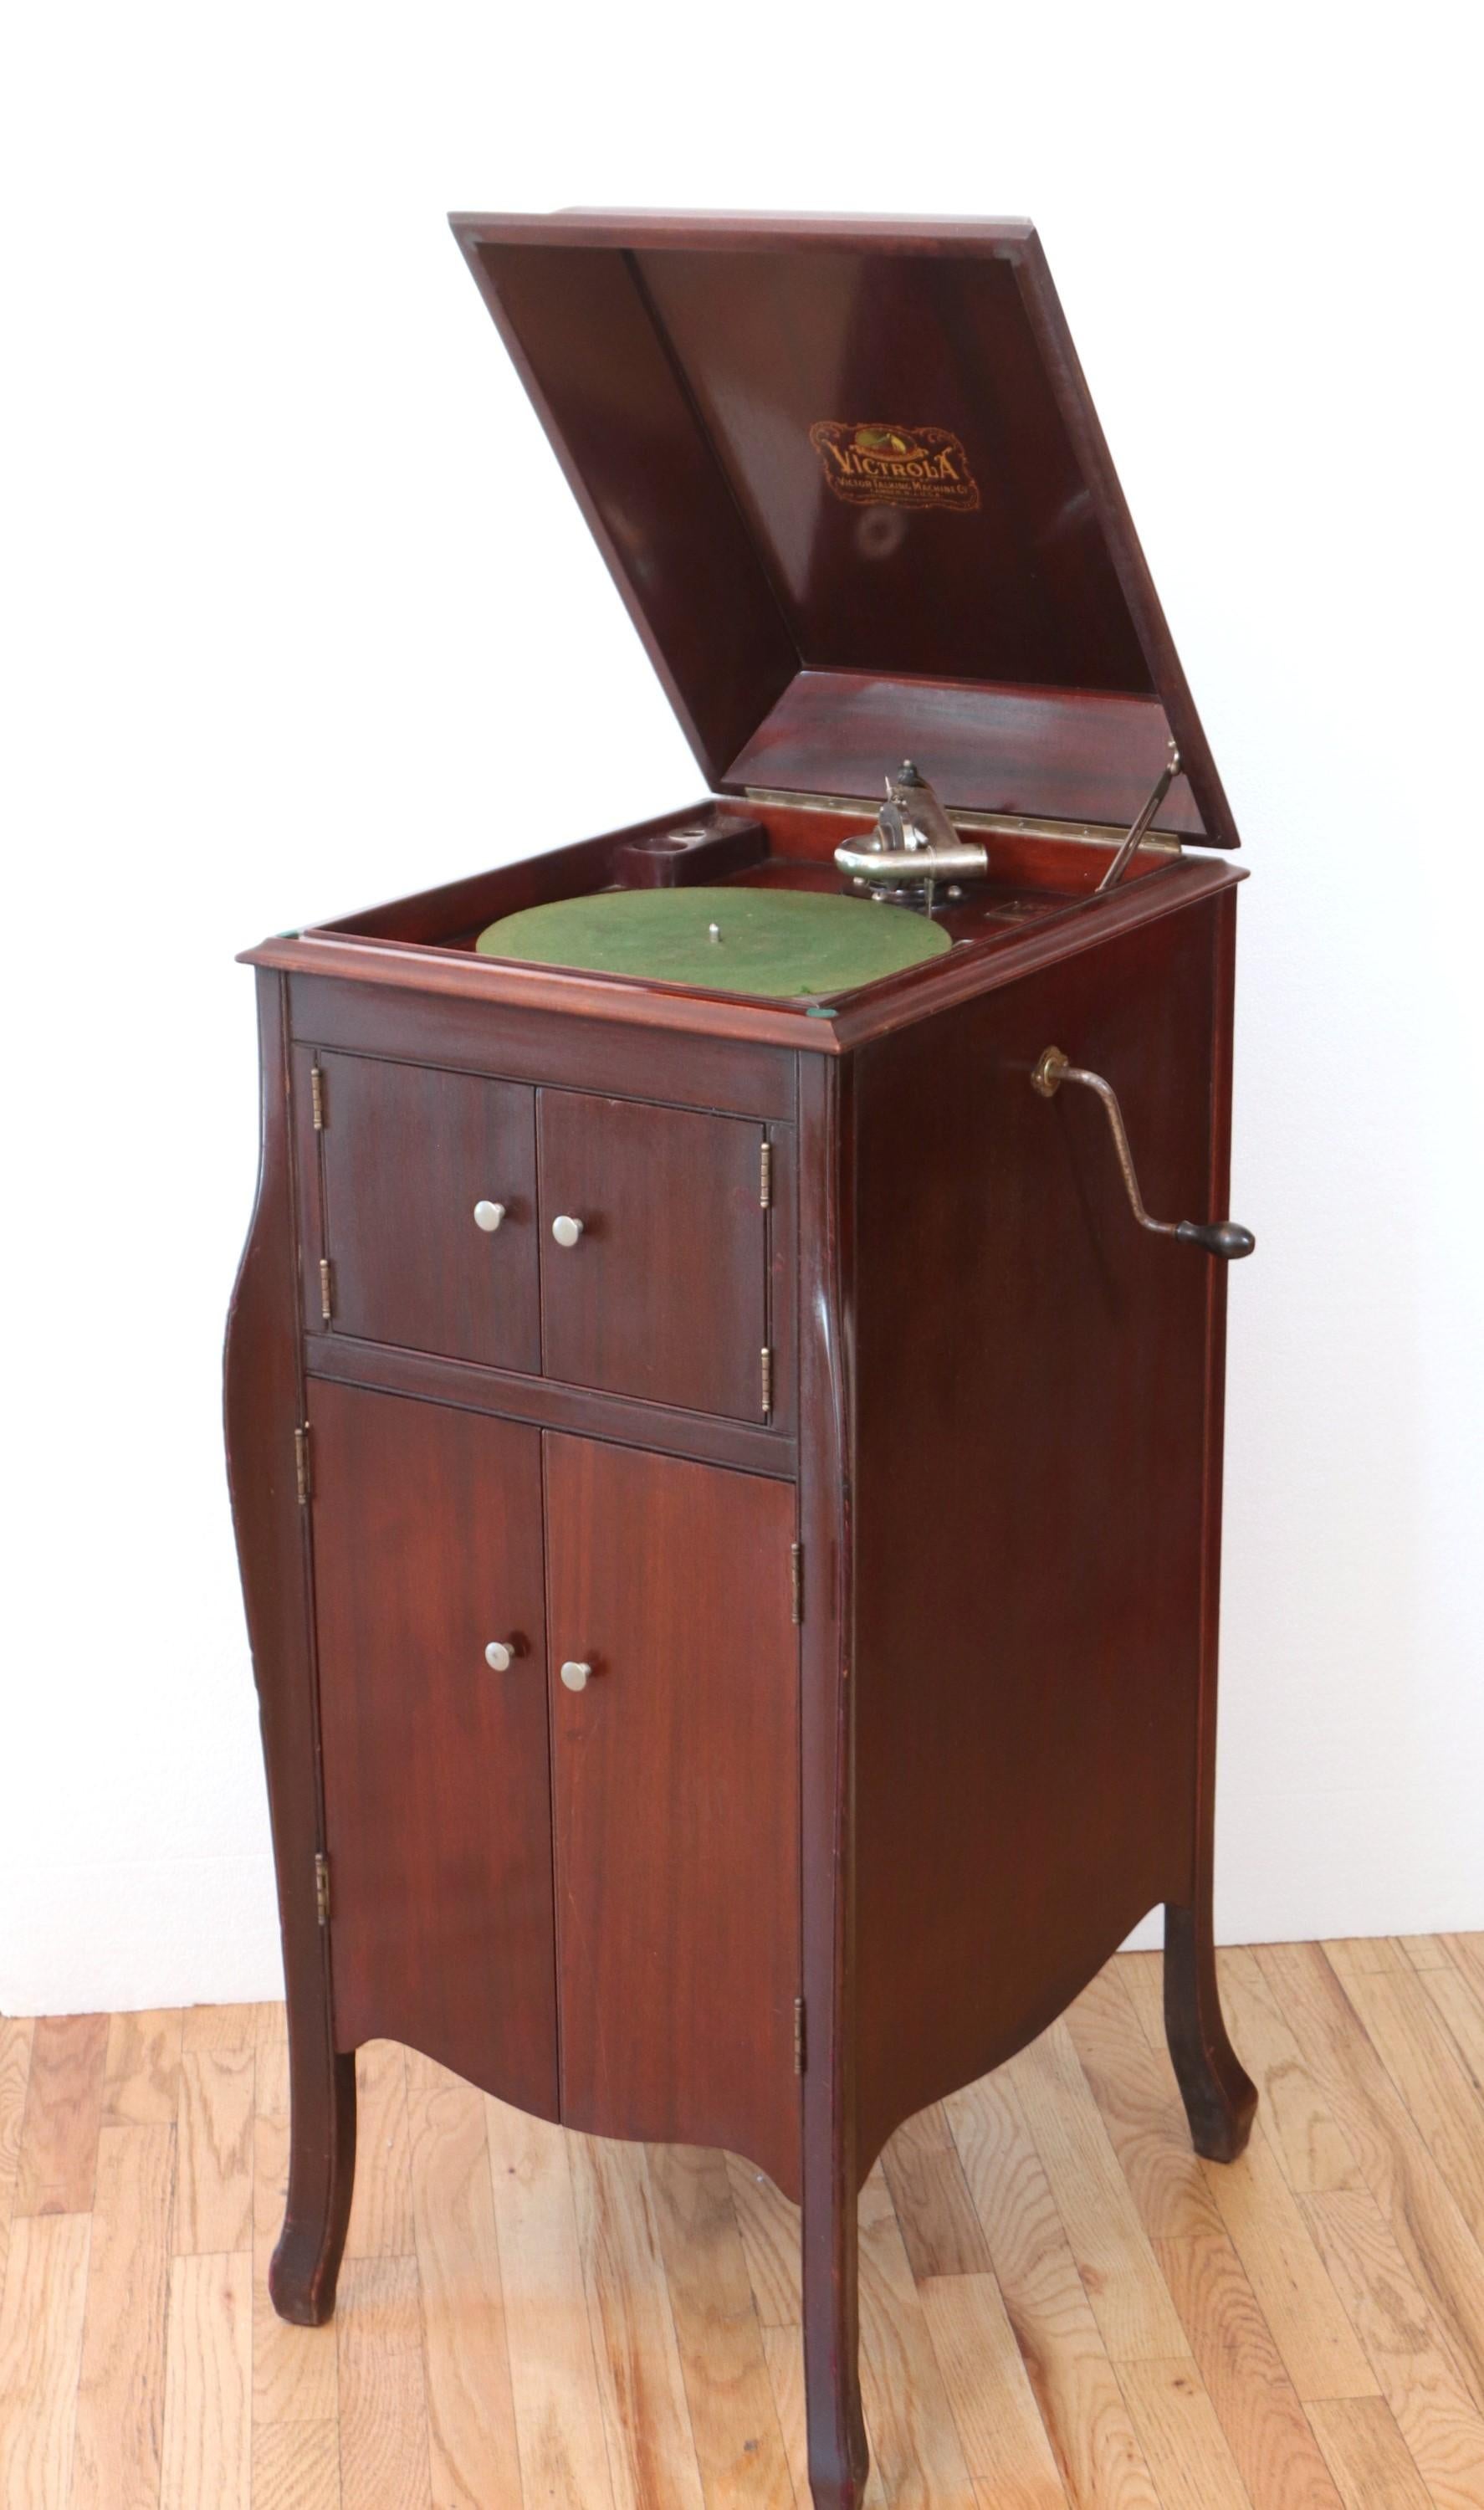 Victrola VV-X Floor-Model Phonograph by The Victrola Talking Machine Co. For Sale 1